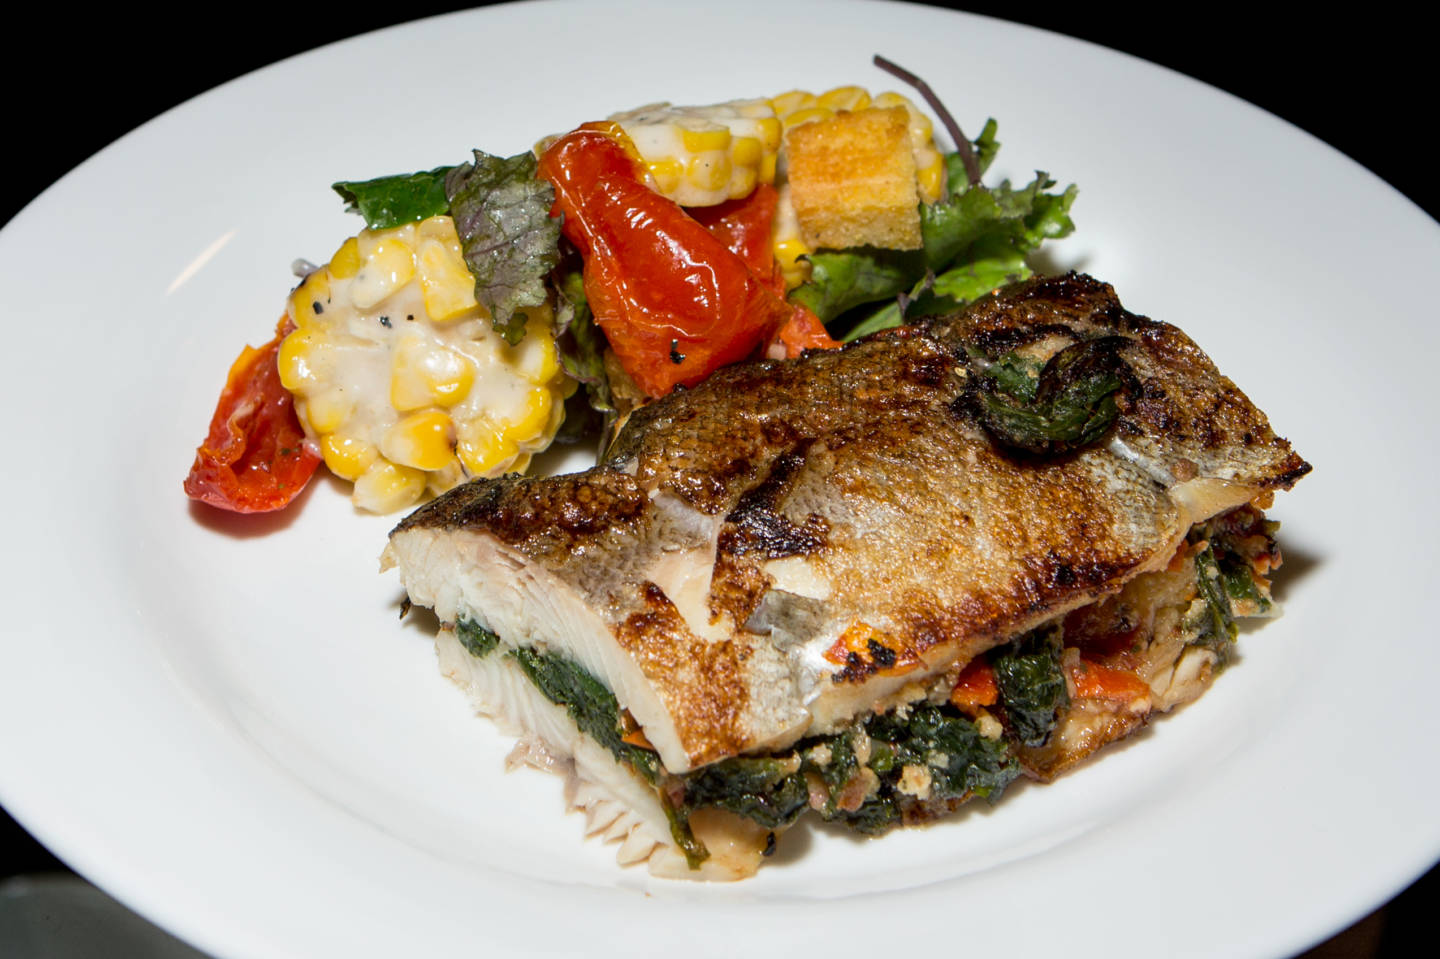 Pan Roast Rainbow Trout, served with cornbread and mustard greens stuffing and hazelnut brown butter, a seafood offering in the Western Range.  Ariel Zambelich/NPR